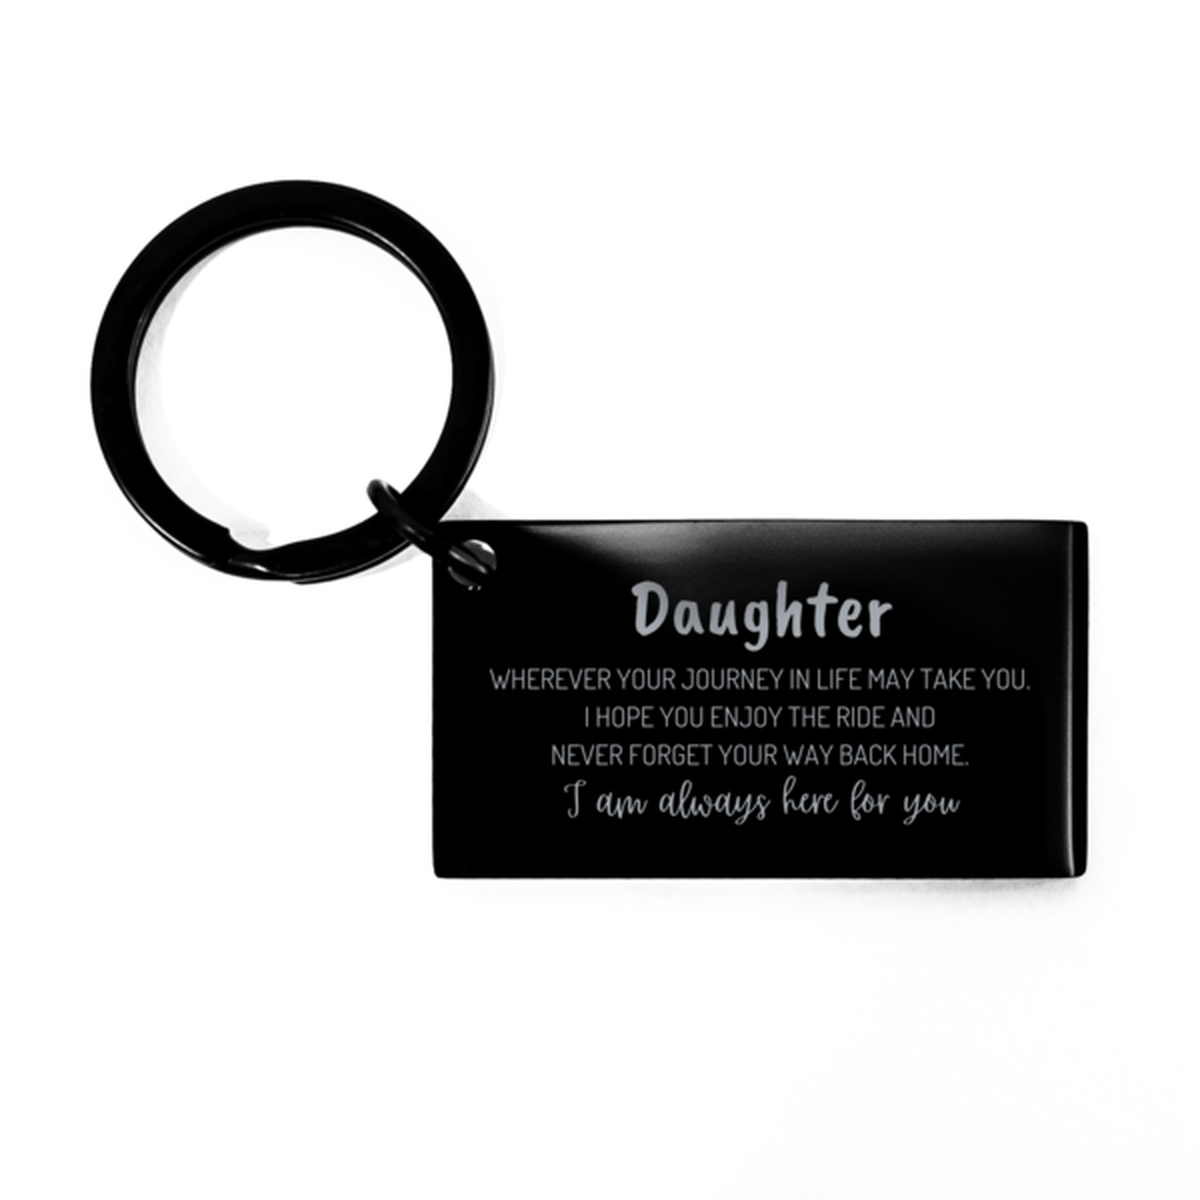 Daughter wherever your journey in life may take you, I am always here for you Daughter Keychain, Awesome Christmas Gifts For Daughter, Daughter Birthday Gifts for Men Women Family Loved One